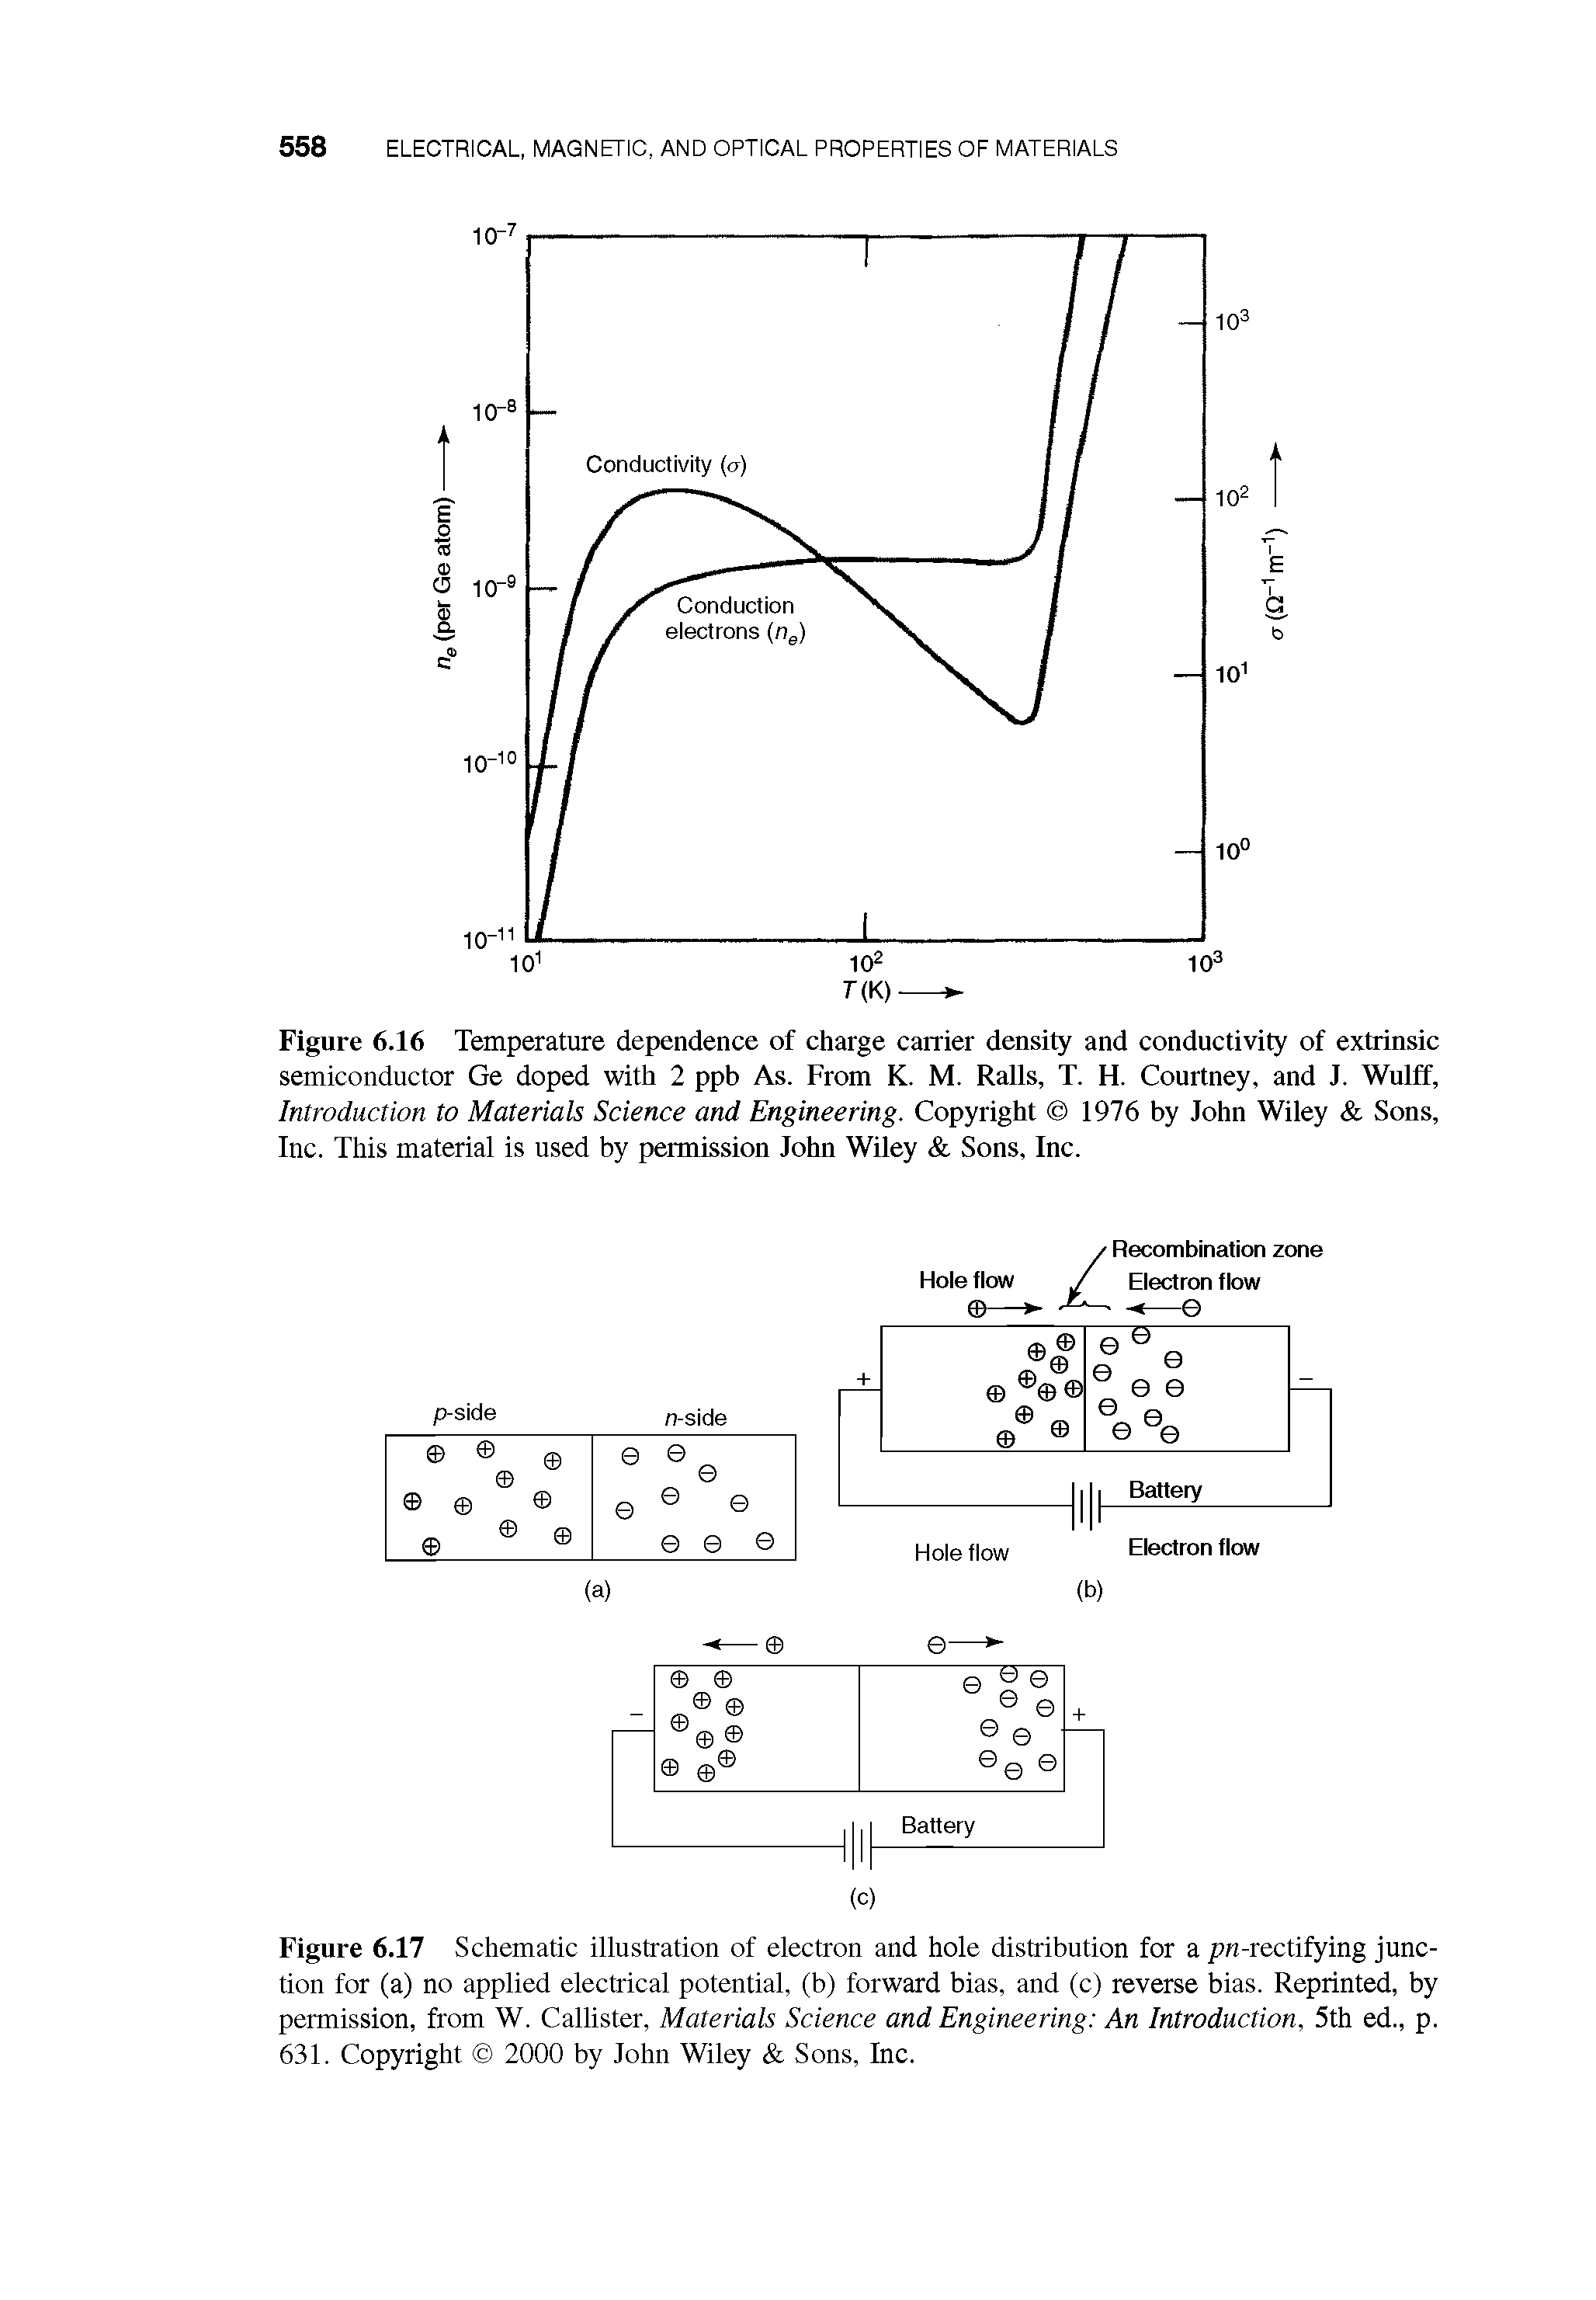 Figure 6.16 Temperature dependence of charge carrier density and conductivity of extrinsic semiconductor Ge doped with 2 ppb As. From K. M. Ralls, T. H. Courtney, and J. Wulff, Introduction to Materials Science and Engineering. Copyright 1976 by John Wiley Sons, Inc. This material is used by permission John Wiley Sons, Inc.